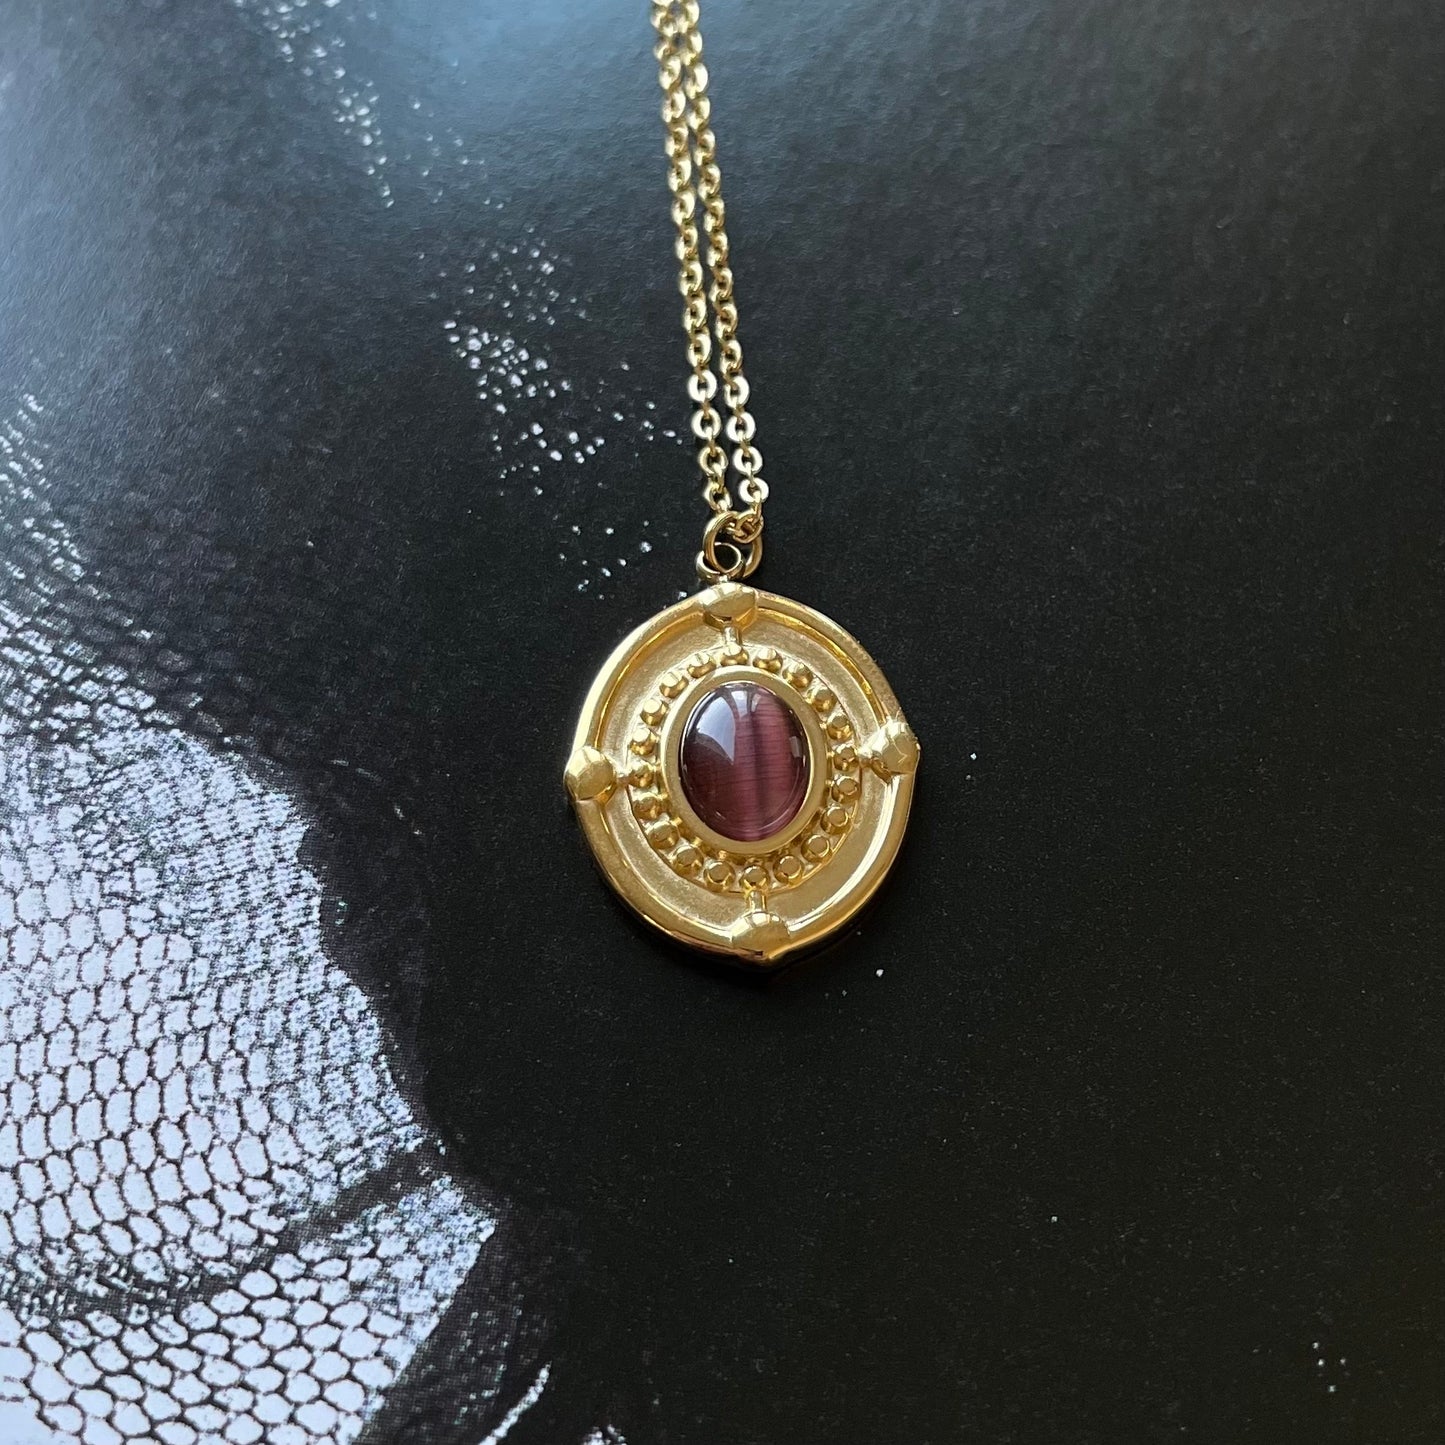 Reign Ruby Cateye pendant necklace